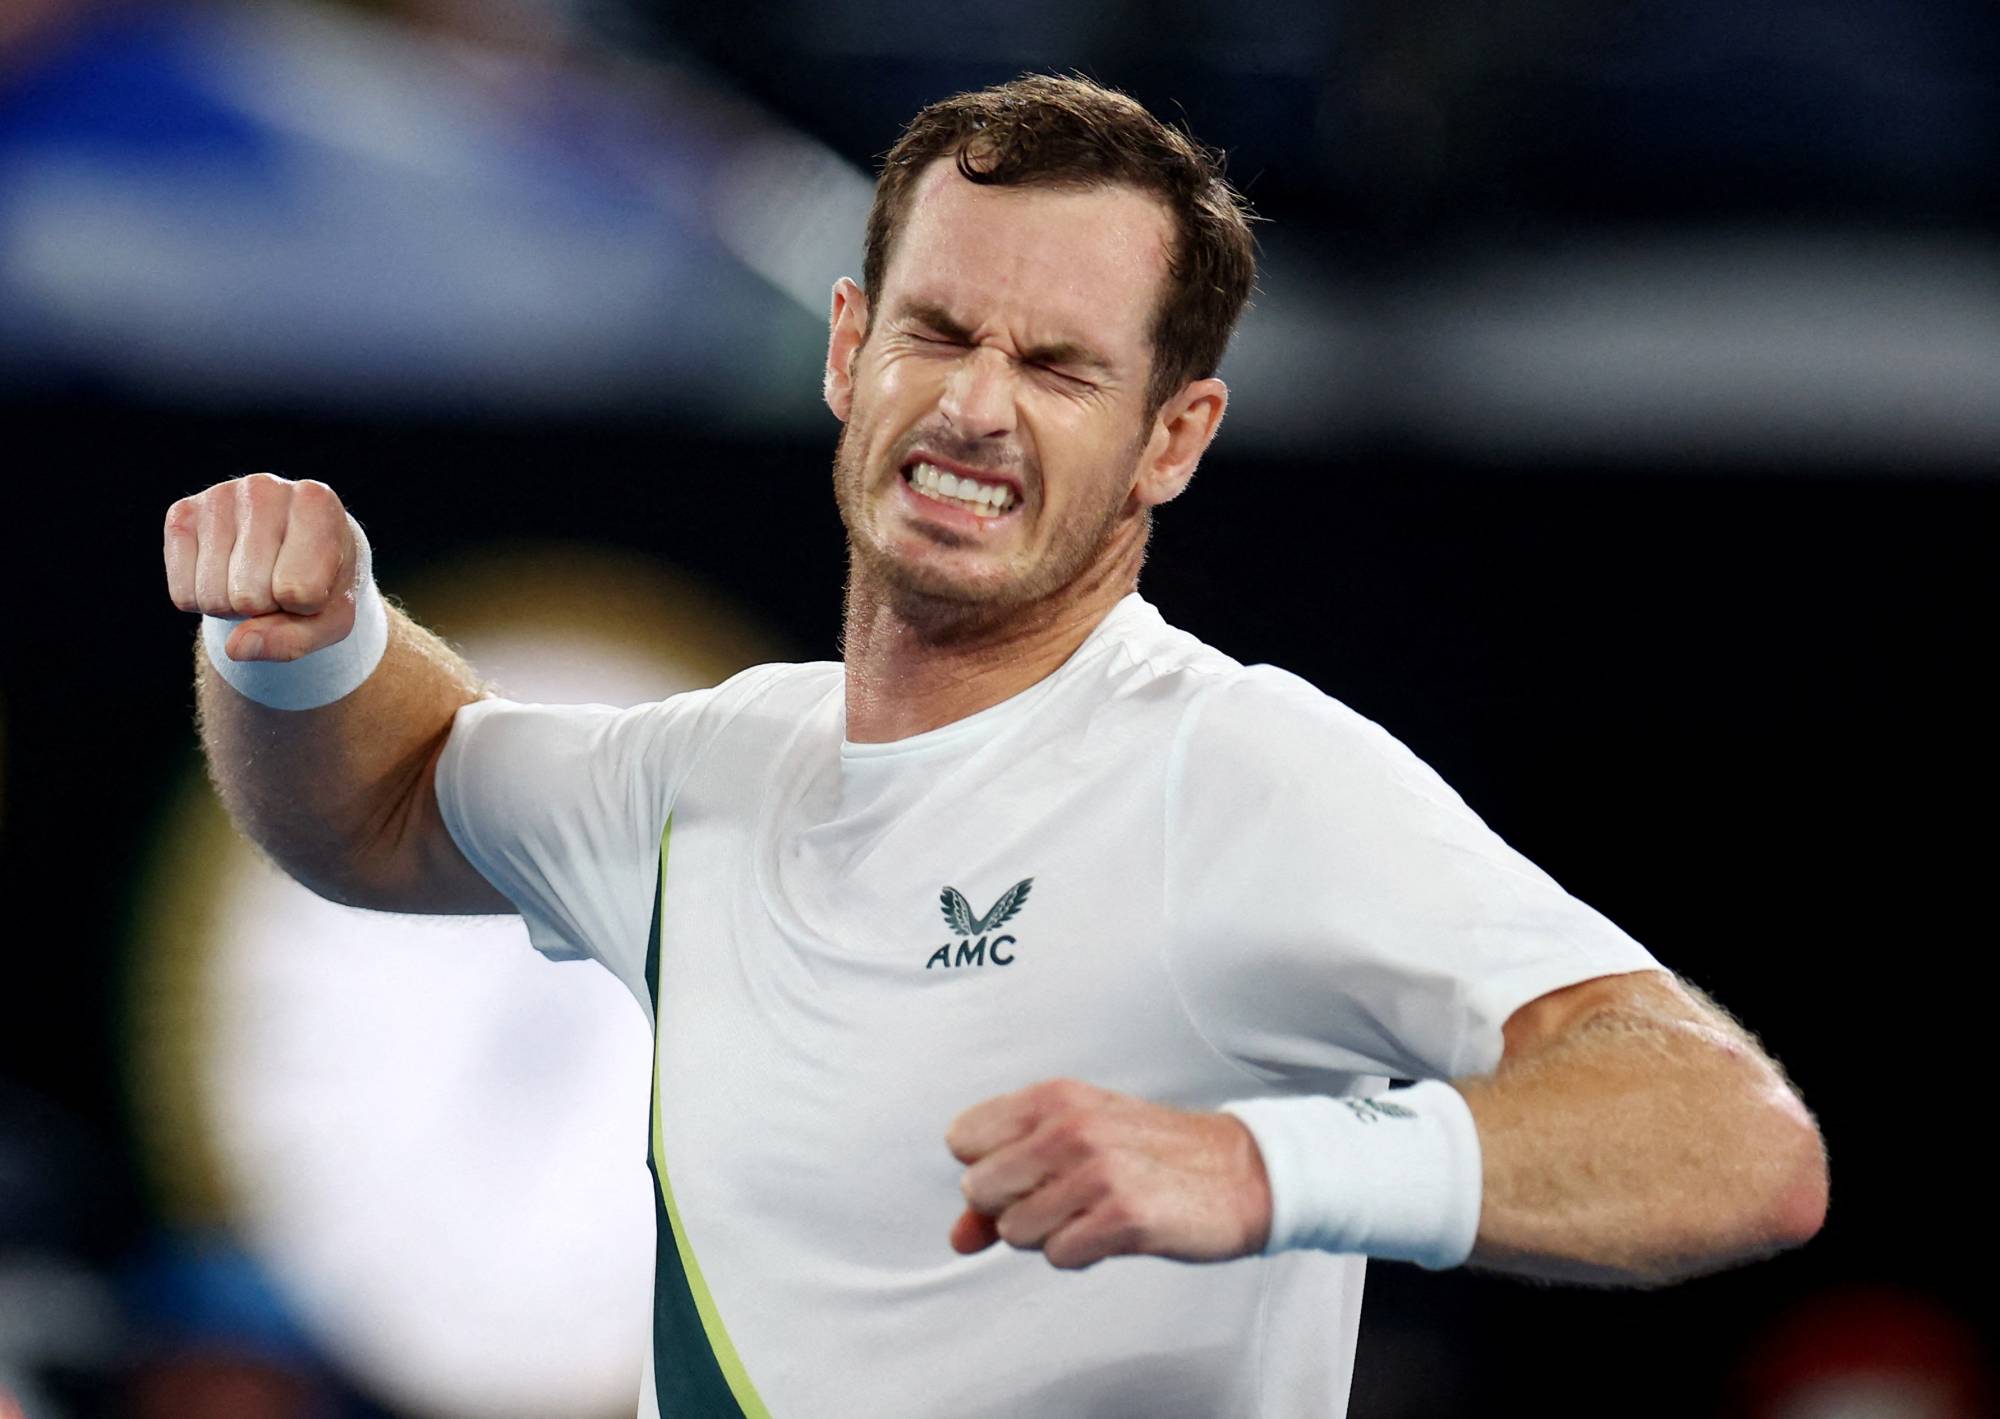 Andy Murray celebrates after winning his first-round match against Matteo Berrettini at the Australian Open in Melbourne on Tuesday. | REUTERS